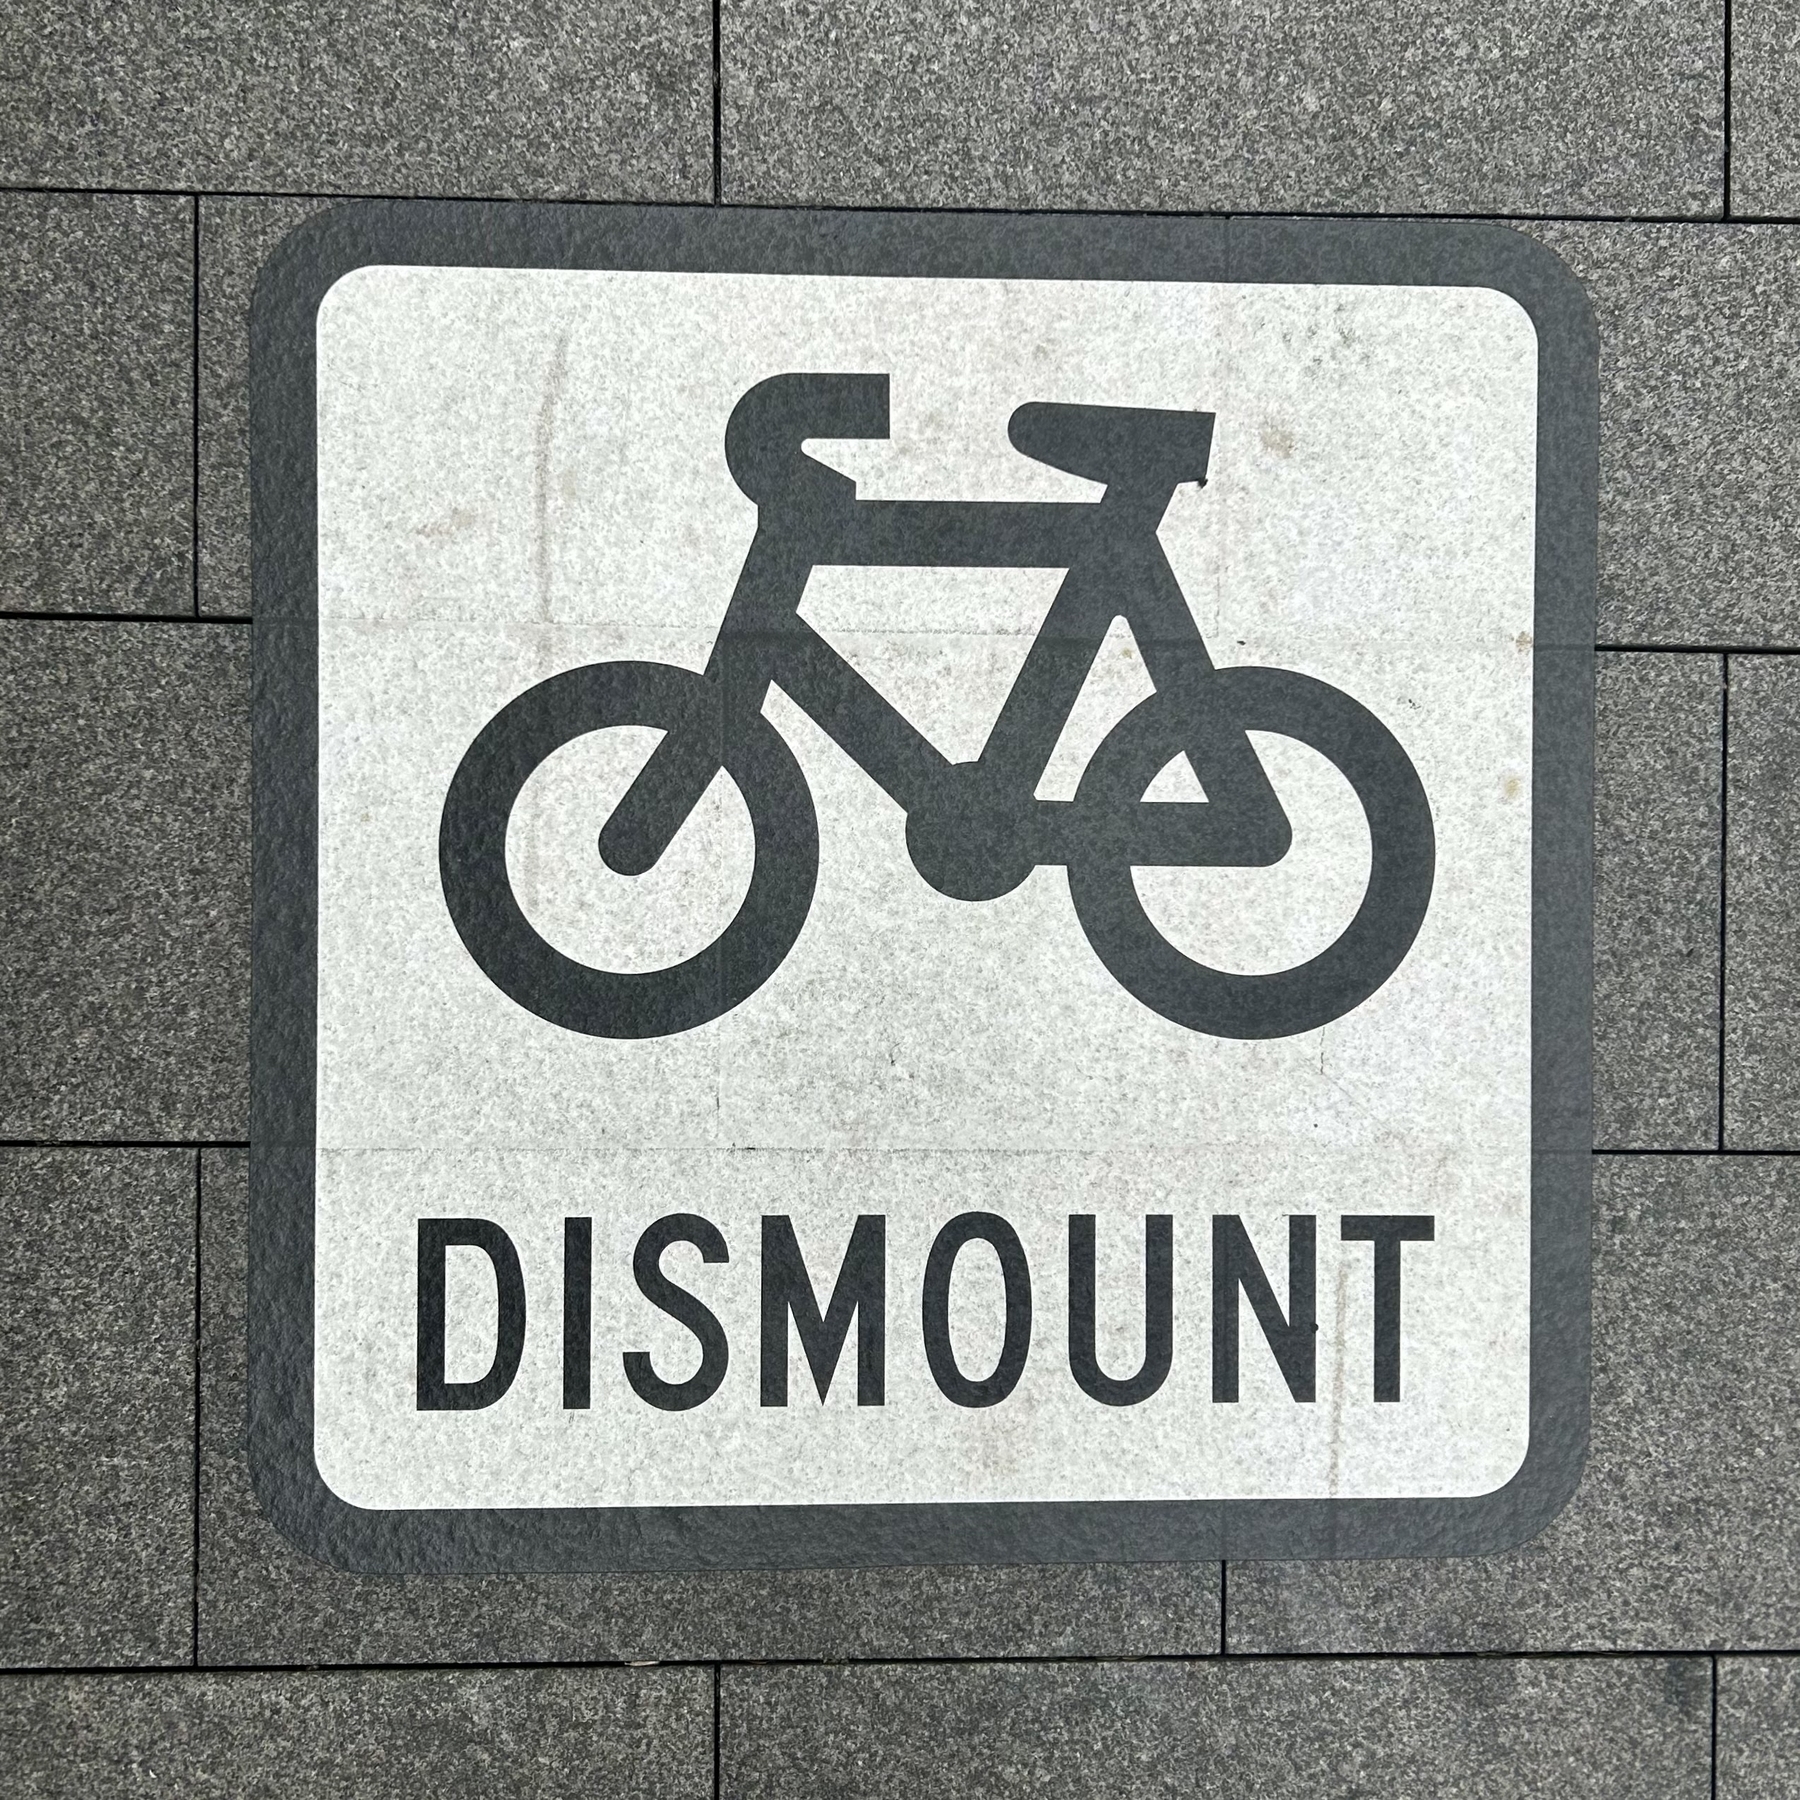 Footpath sign that shows an icon of a bicycle with the word "DISMOUNT"